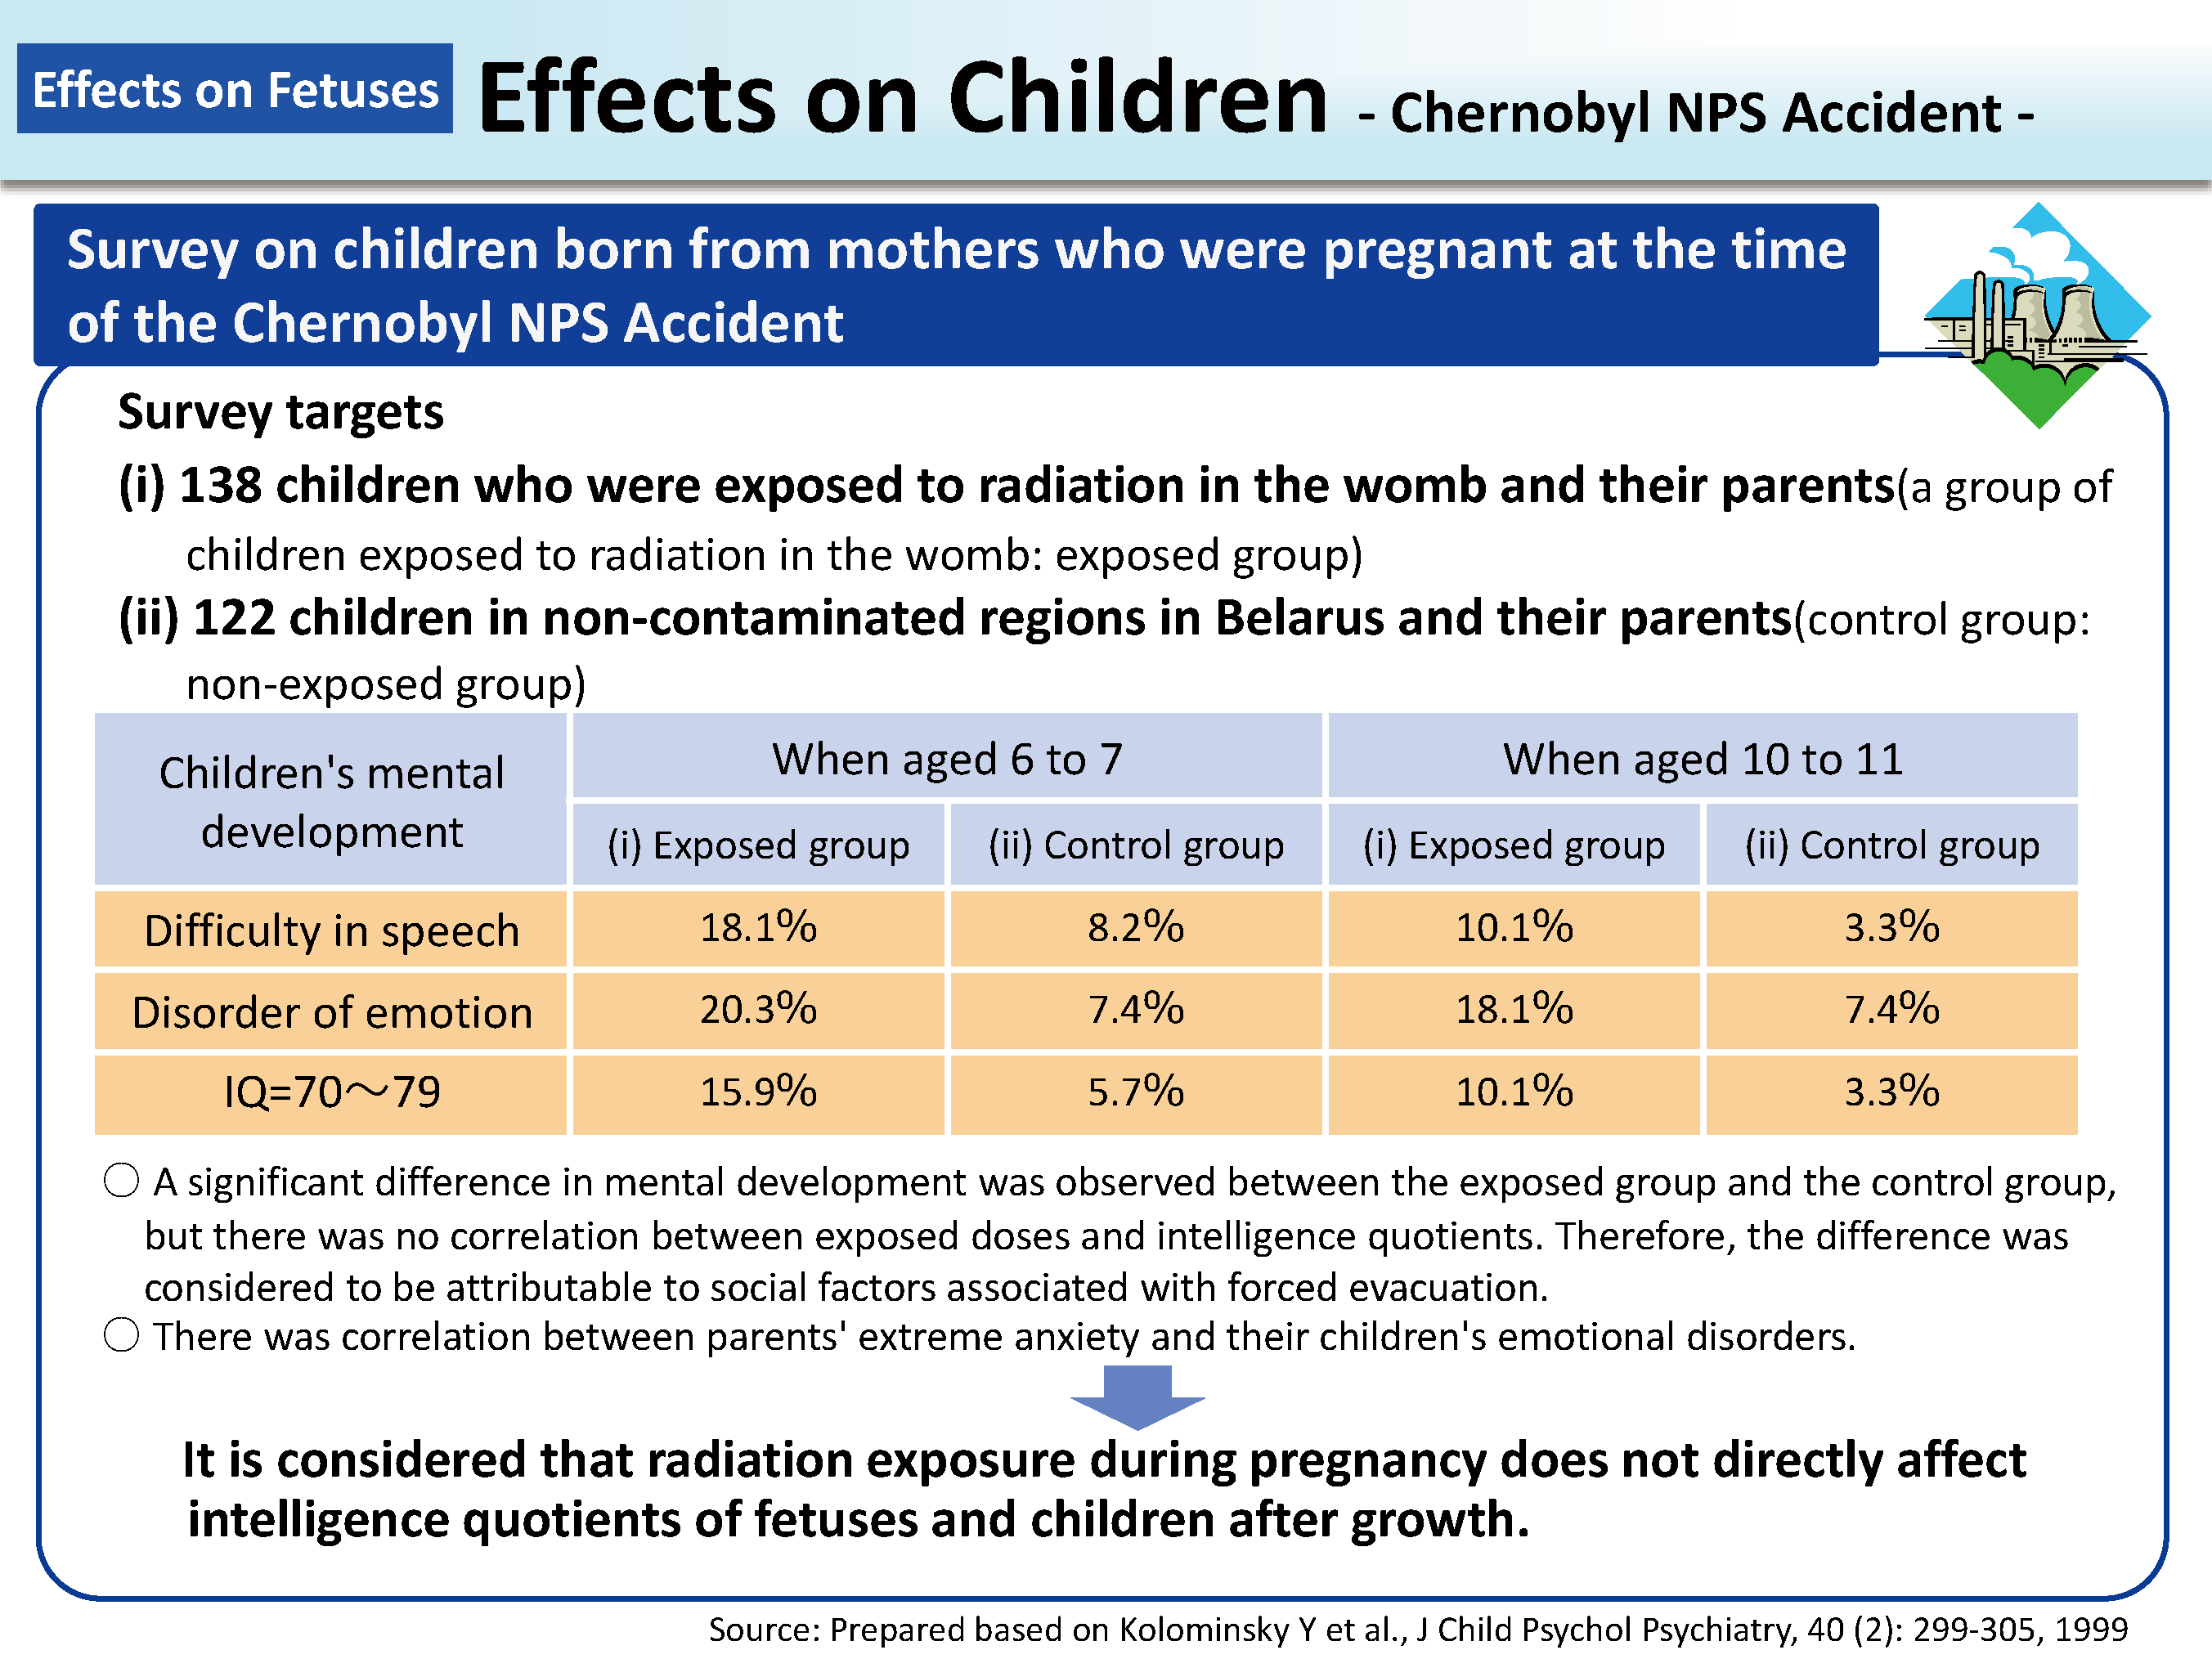 Effects on Children - Chernobyl NPS Accident -_Figure